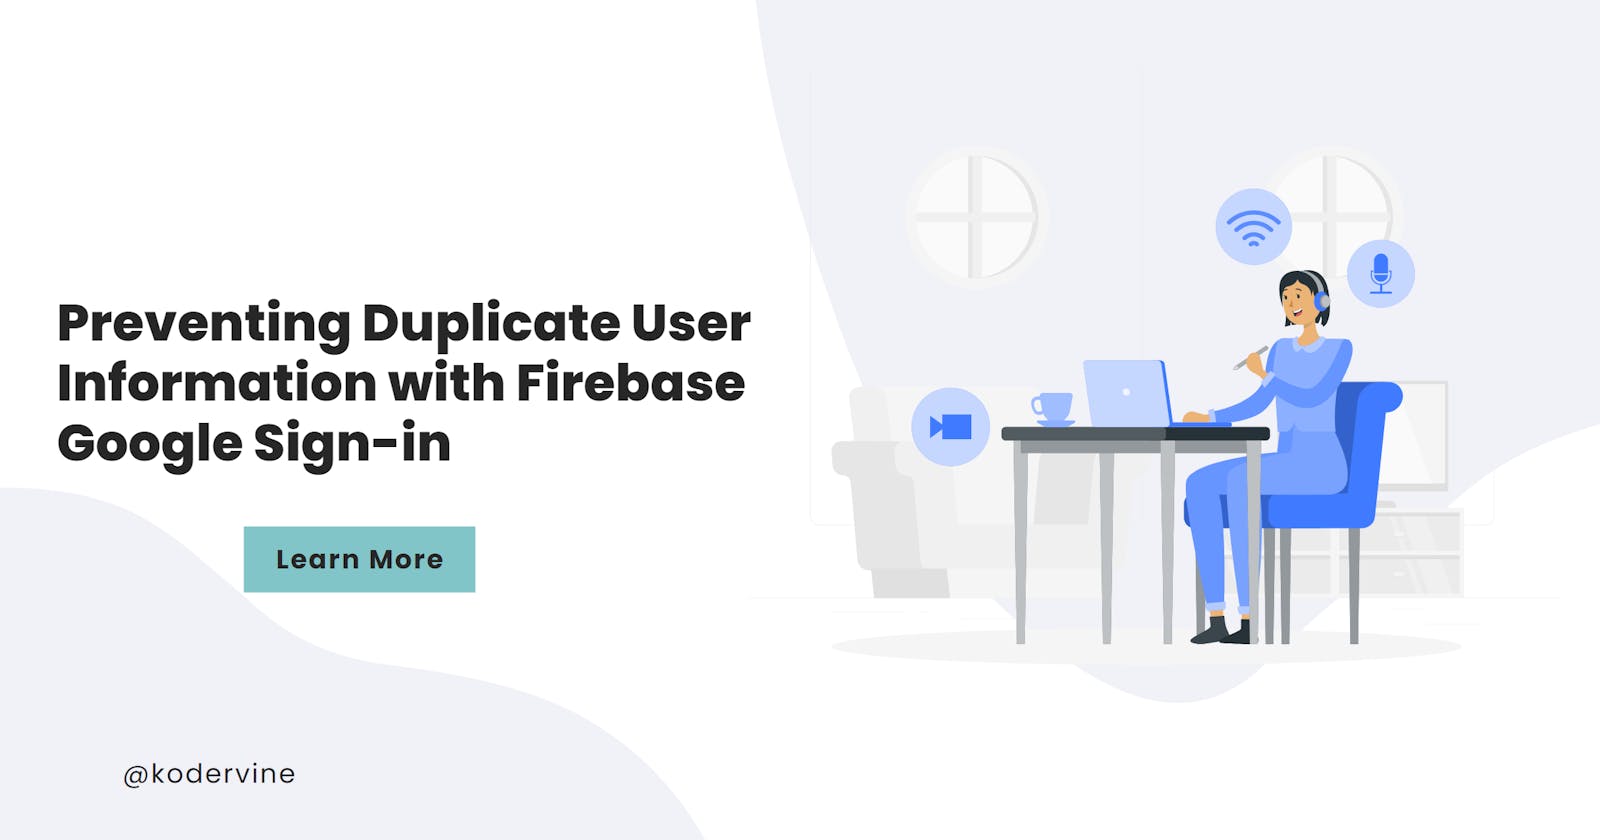 Preventing Duplicate User Information with Firebase Google Sign-in